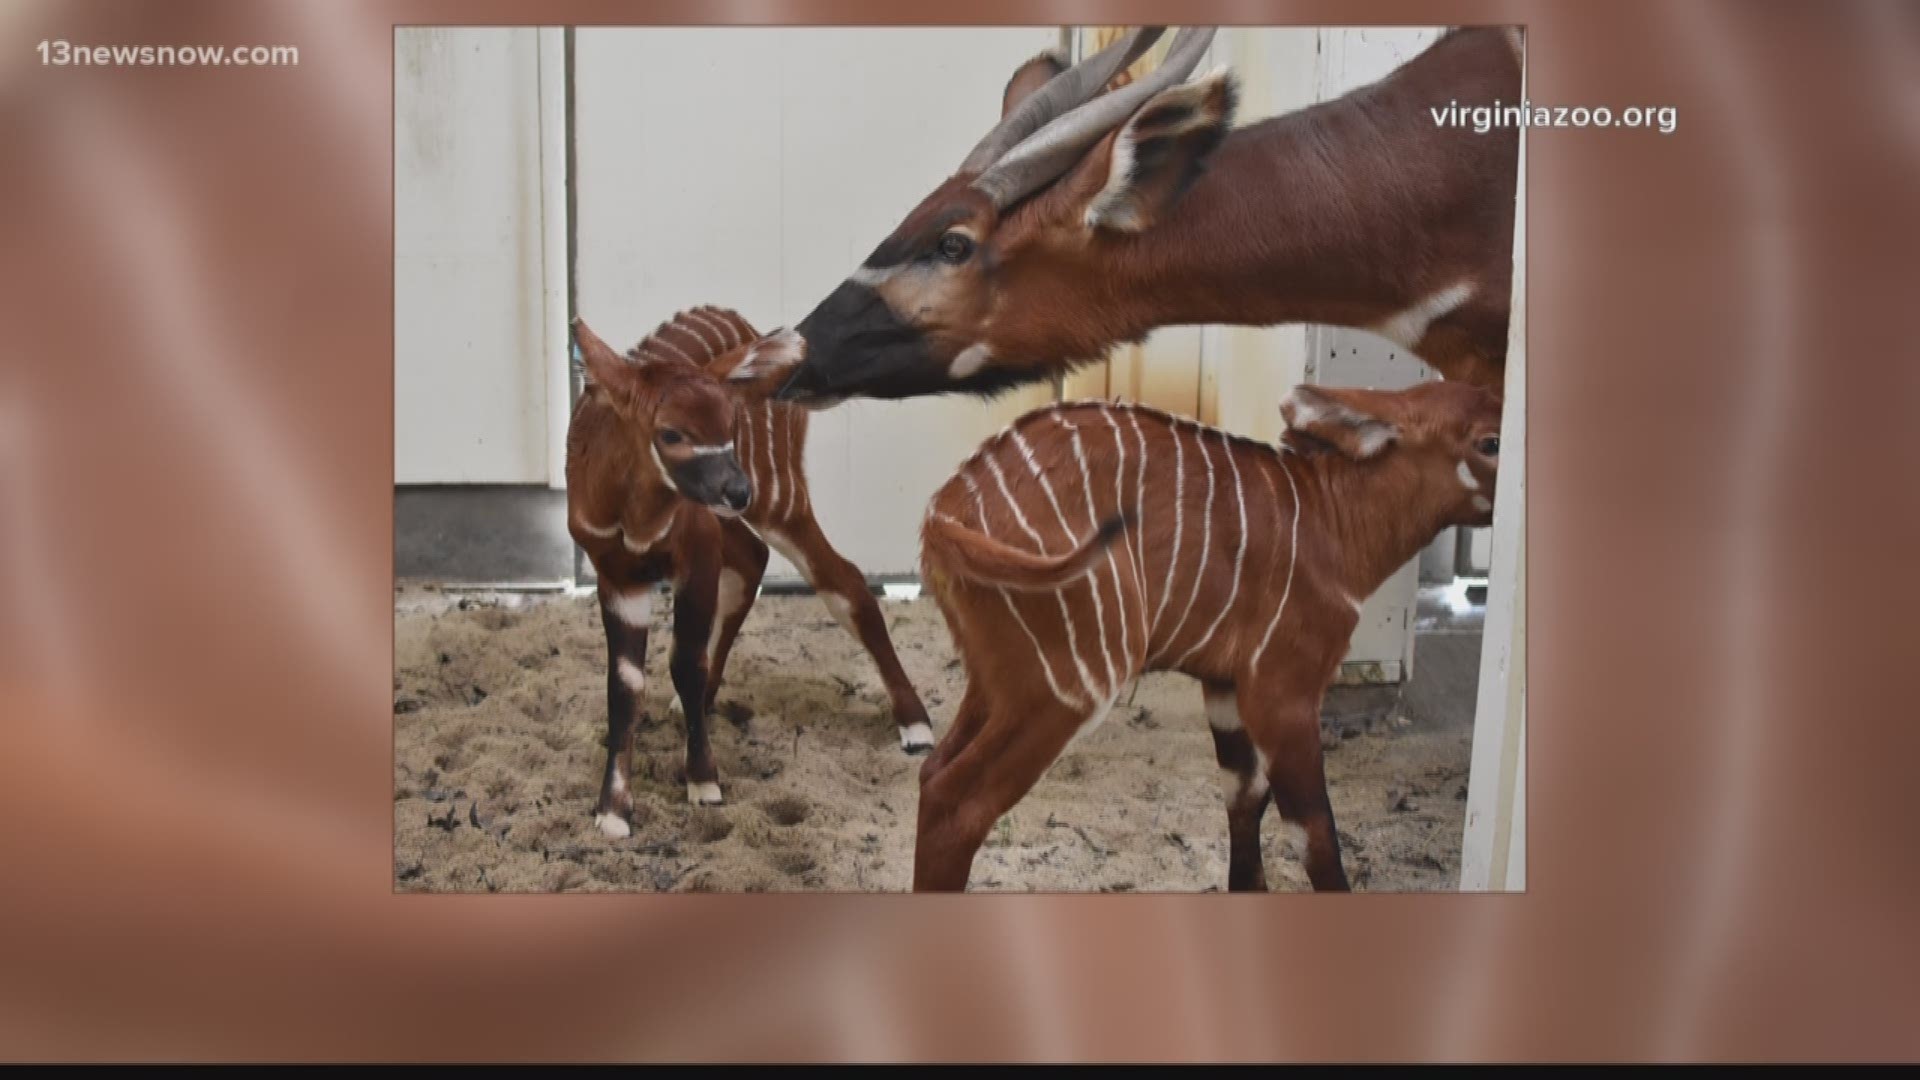 Two Bongo babies were welcomed at the Virginia Zoo.